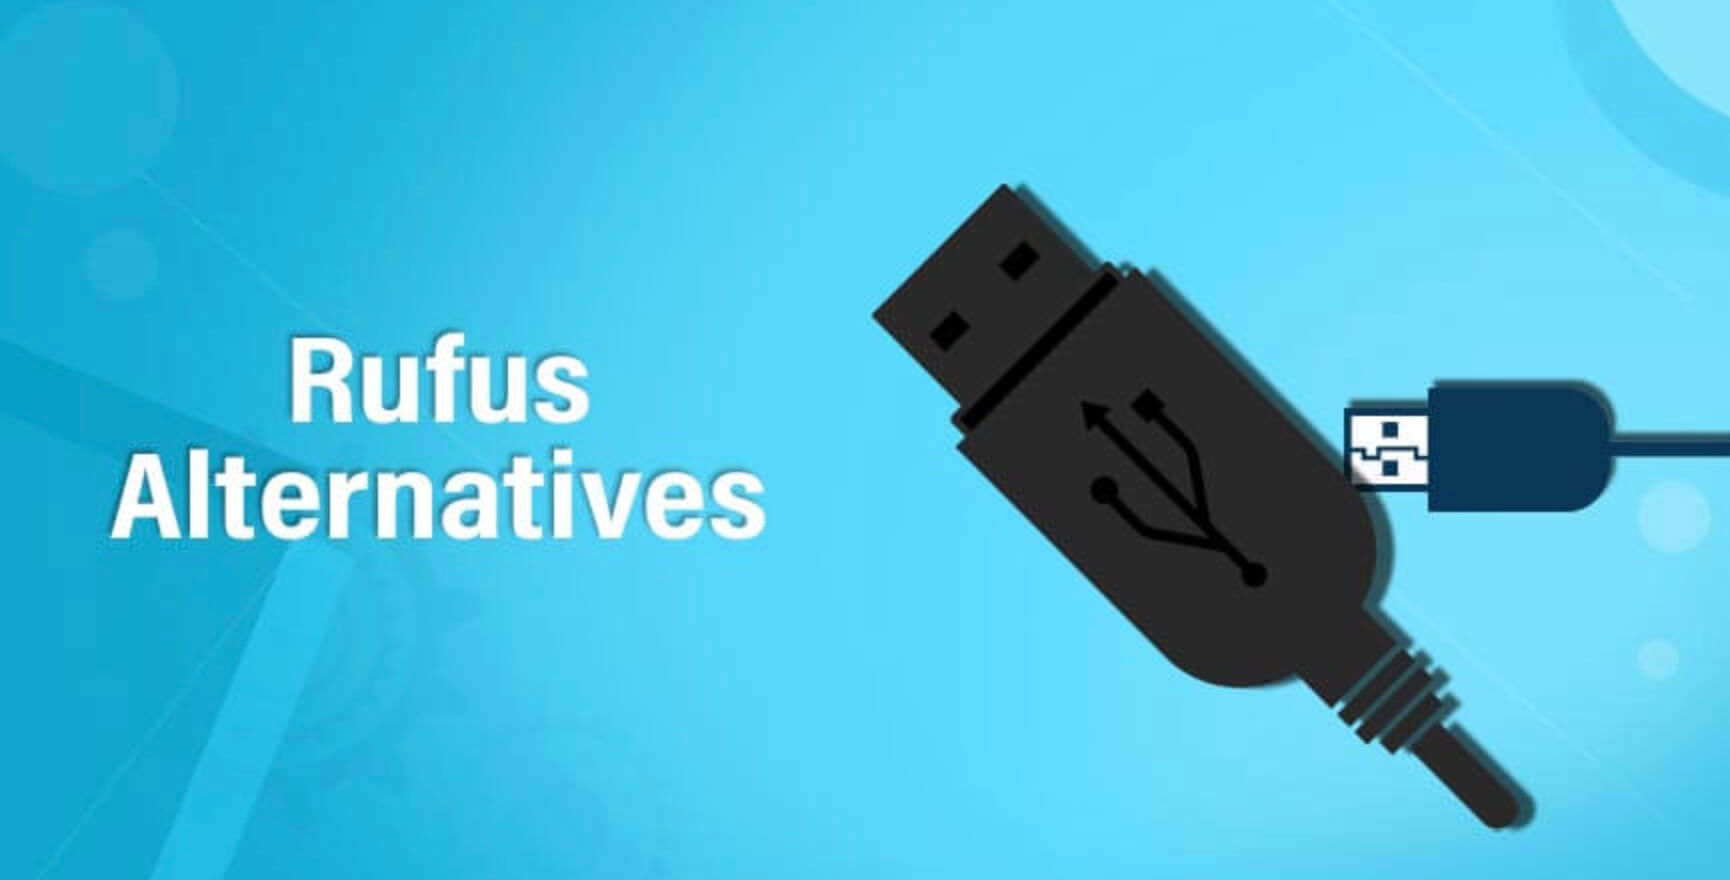 9 Best Rufus Alternatives for Windows, Mac and Linux in 2021